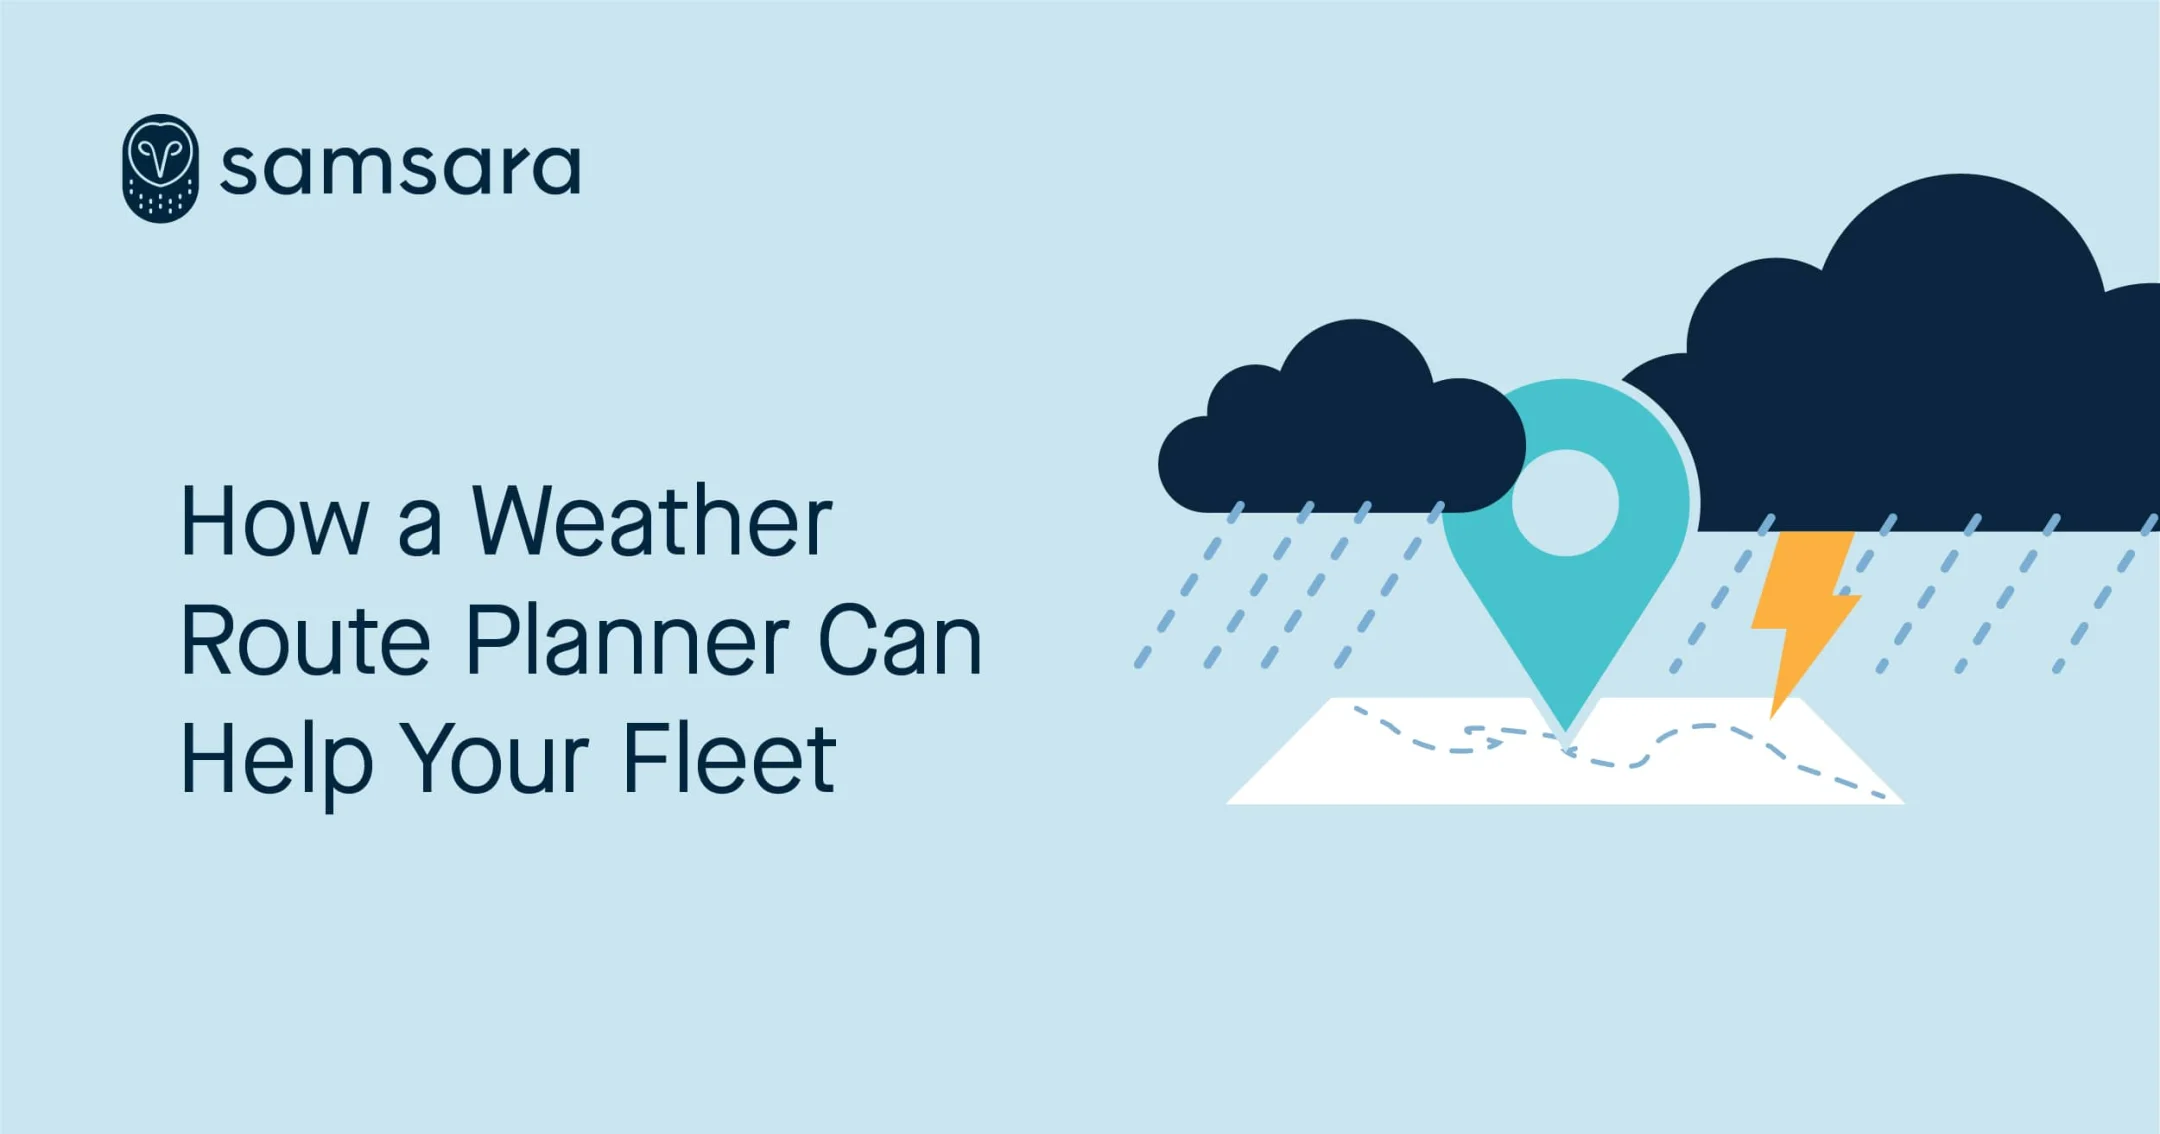 How a Weather Route Planner Can Help Your Fleet